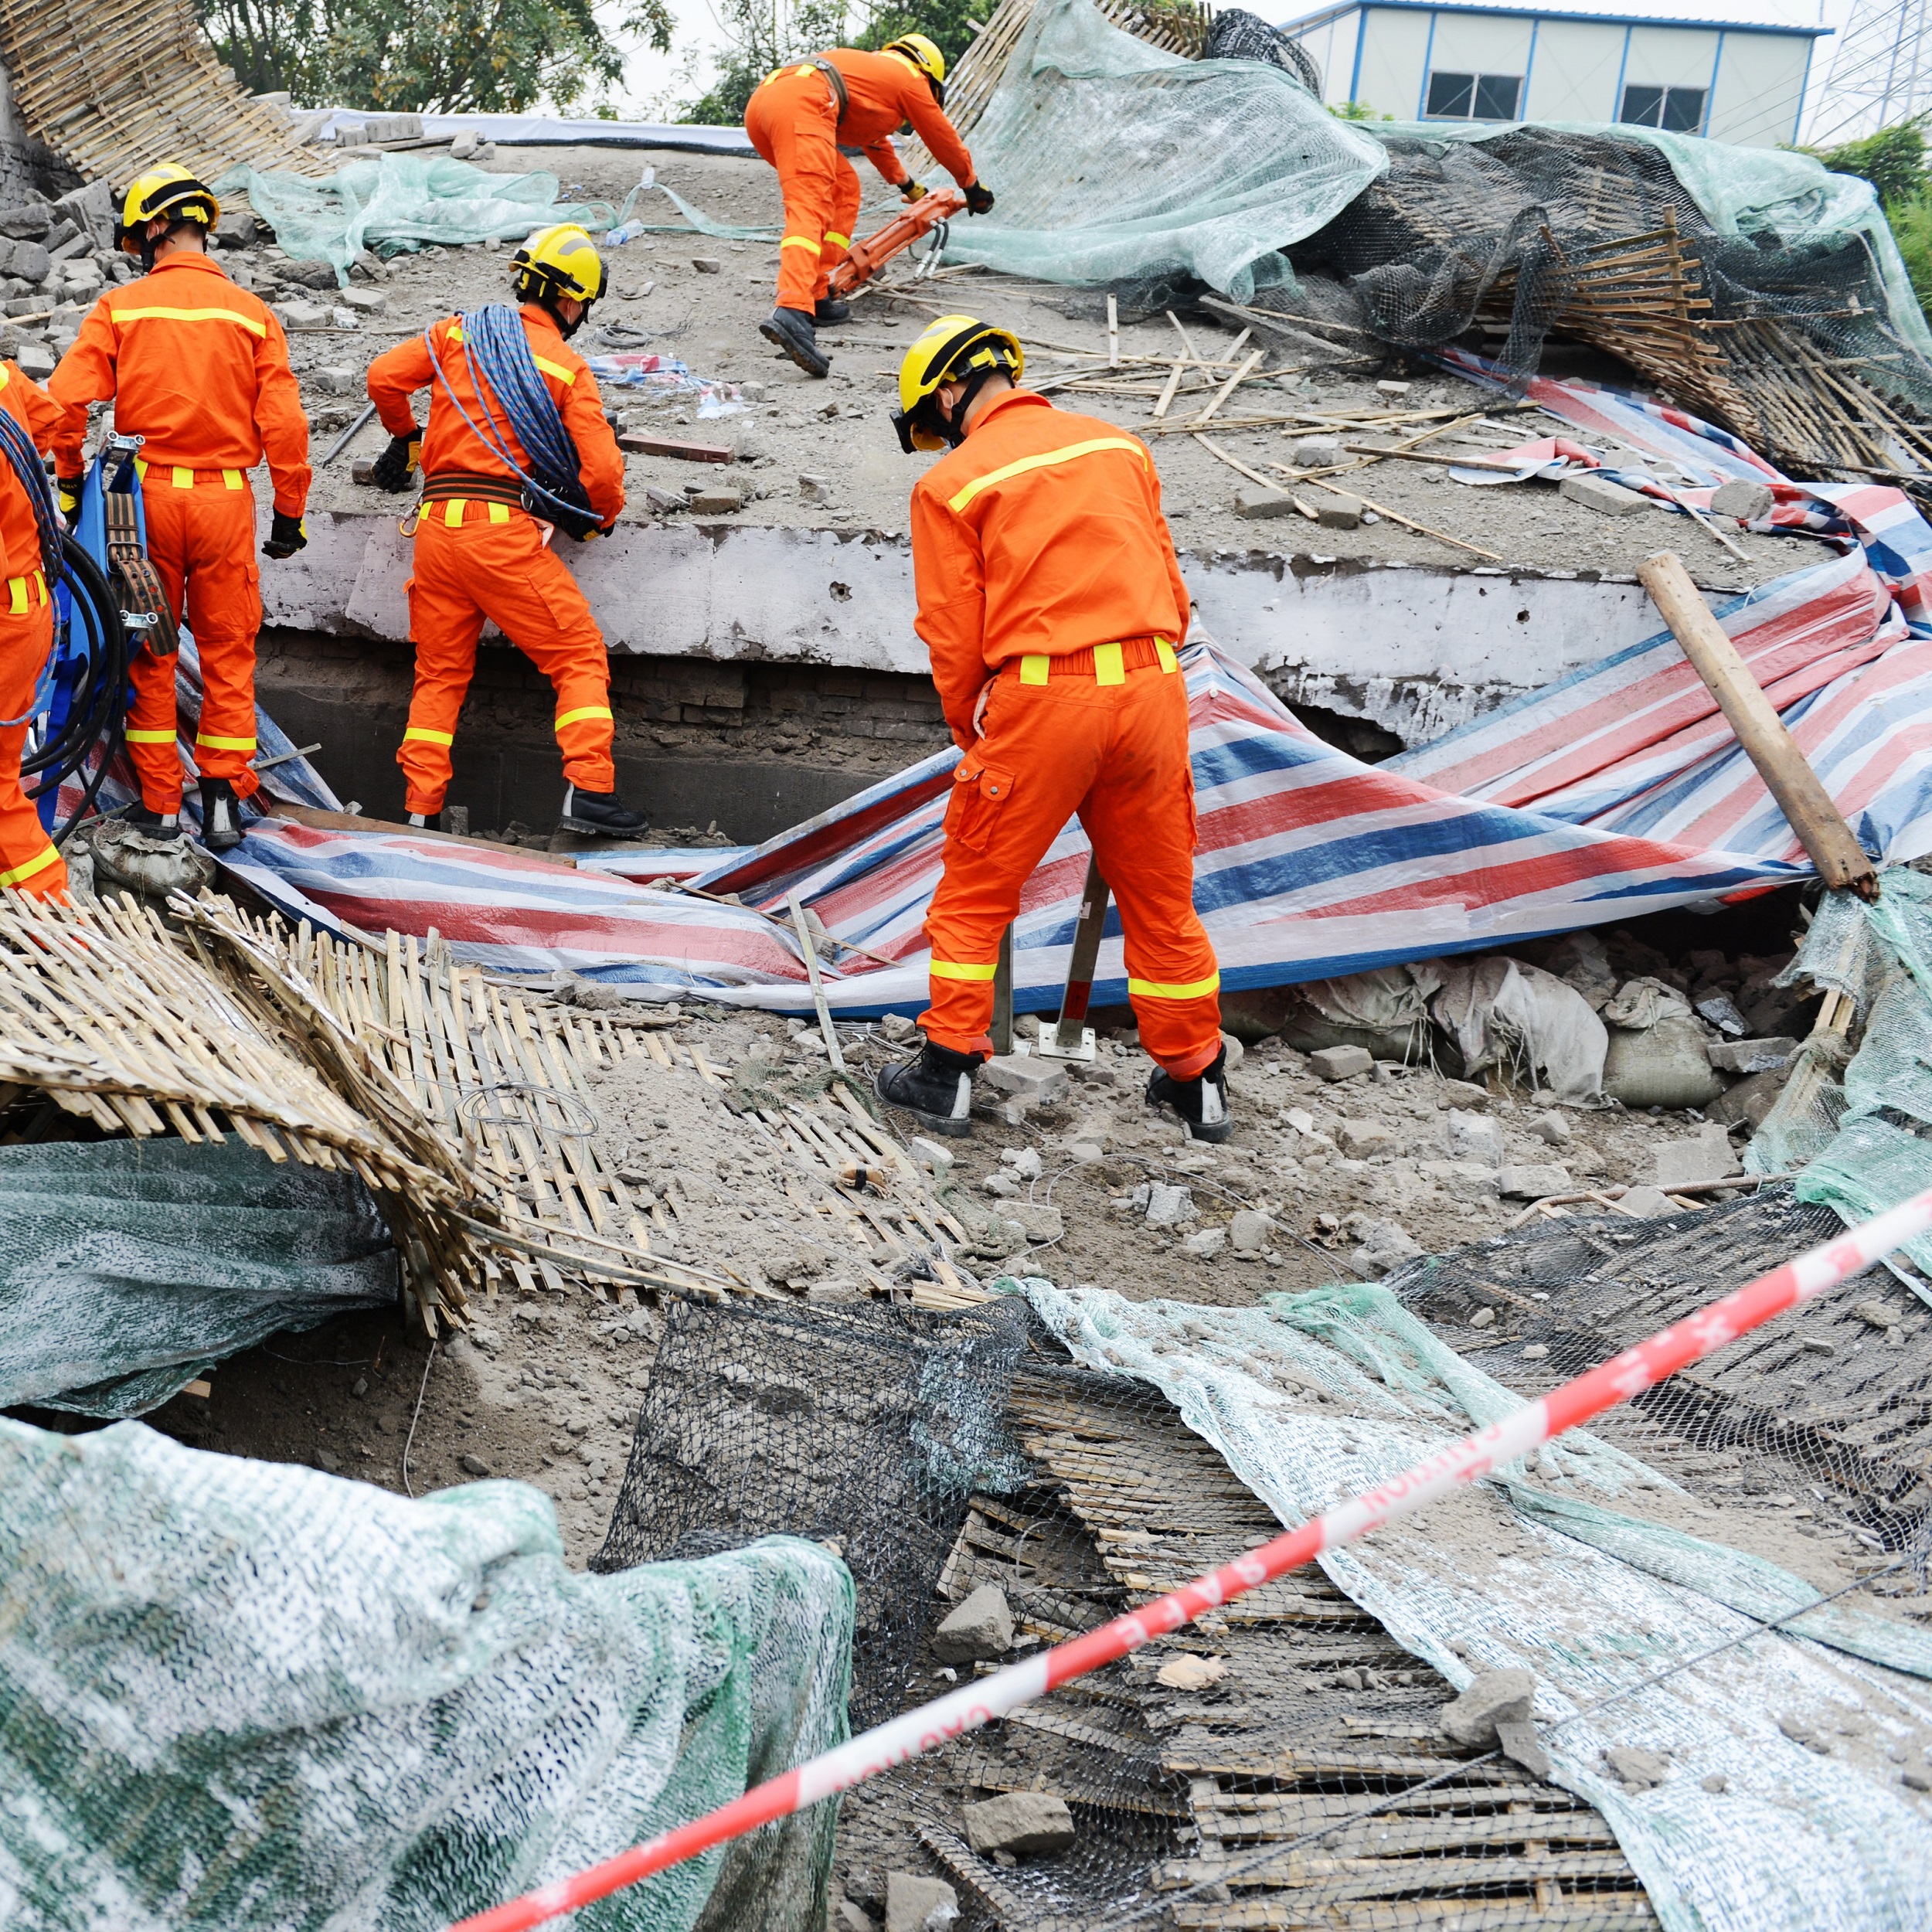 Rescue workers in bright orange clothing and yellow hardhats are seen climbing over the ruits of a building as they search for survivors after a disaster.